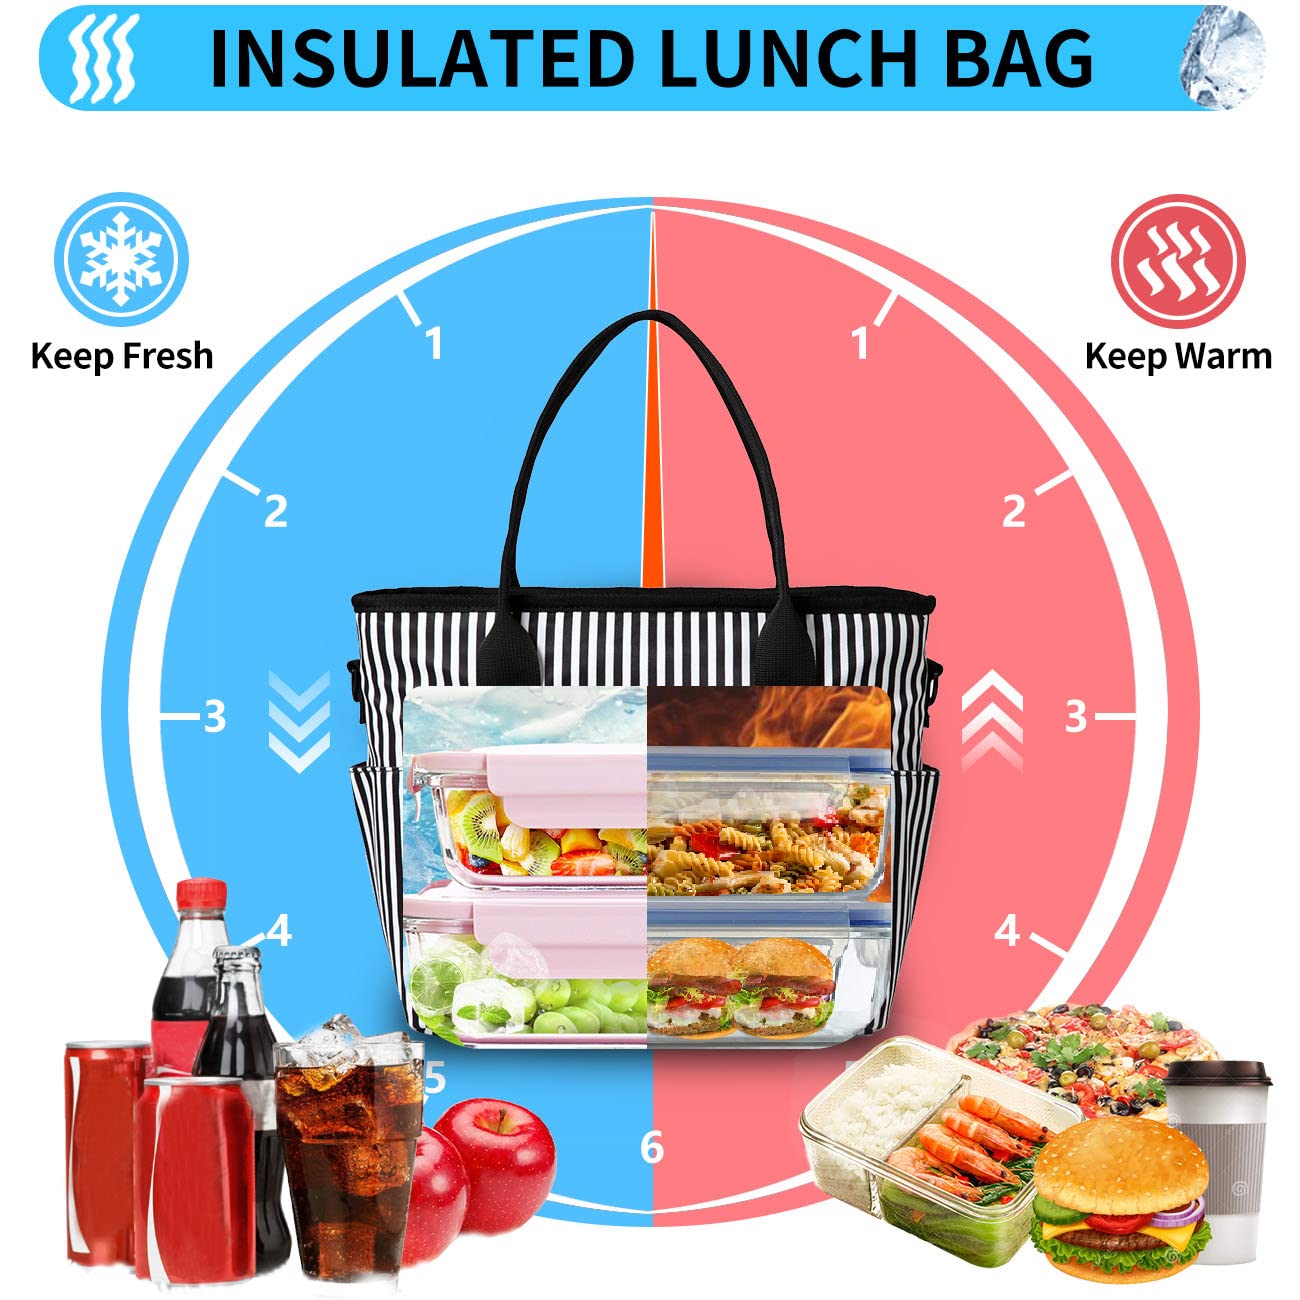 Lunch Bag for Women, ChaseChic Insulated Thermal Lunch Tote Bag Large Lunch Box Container for Adults with Adjustable Shoulder Strap, Reusable Lunch Cooler Bag for Office Work Picnic, Stripe